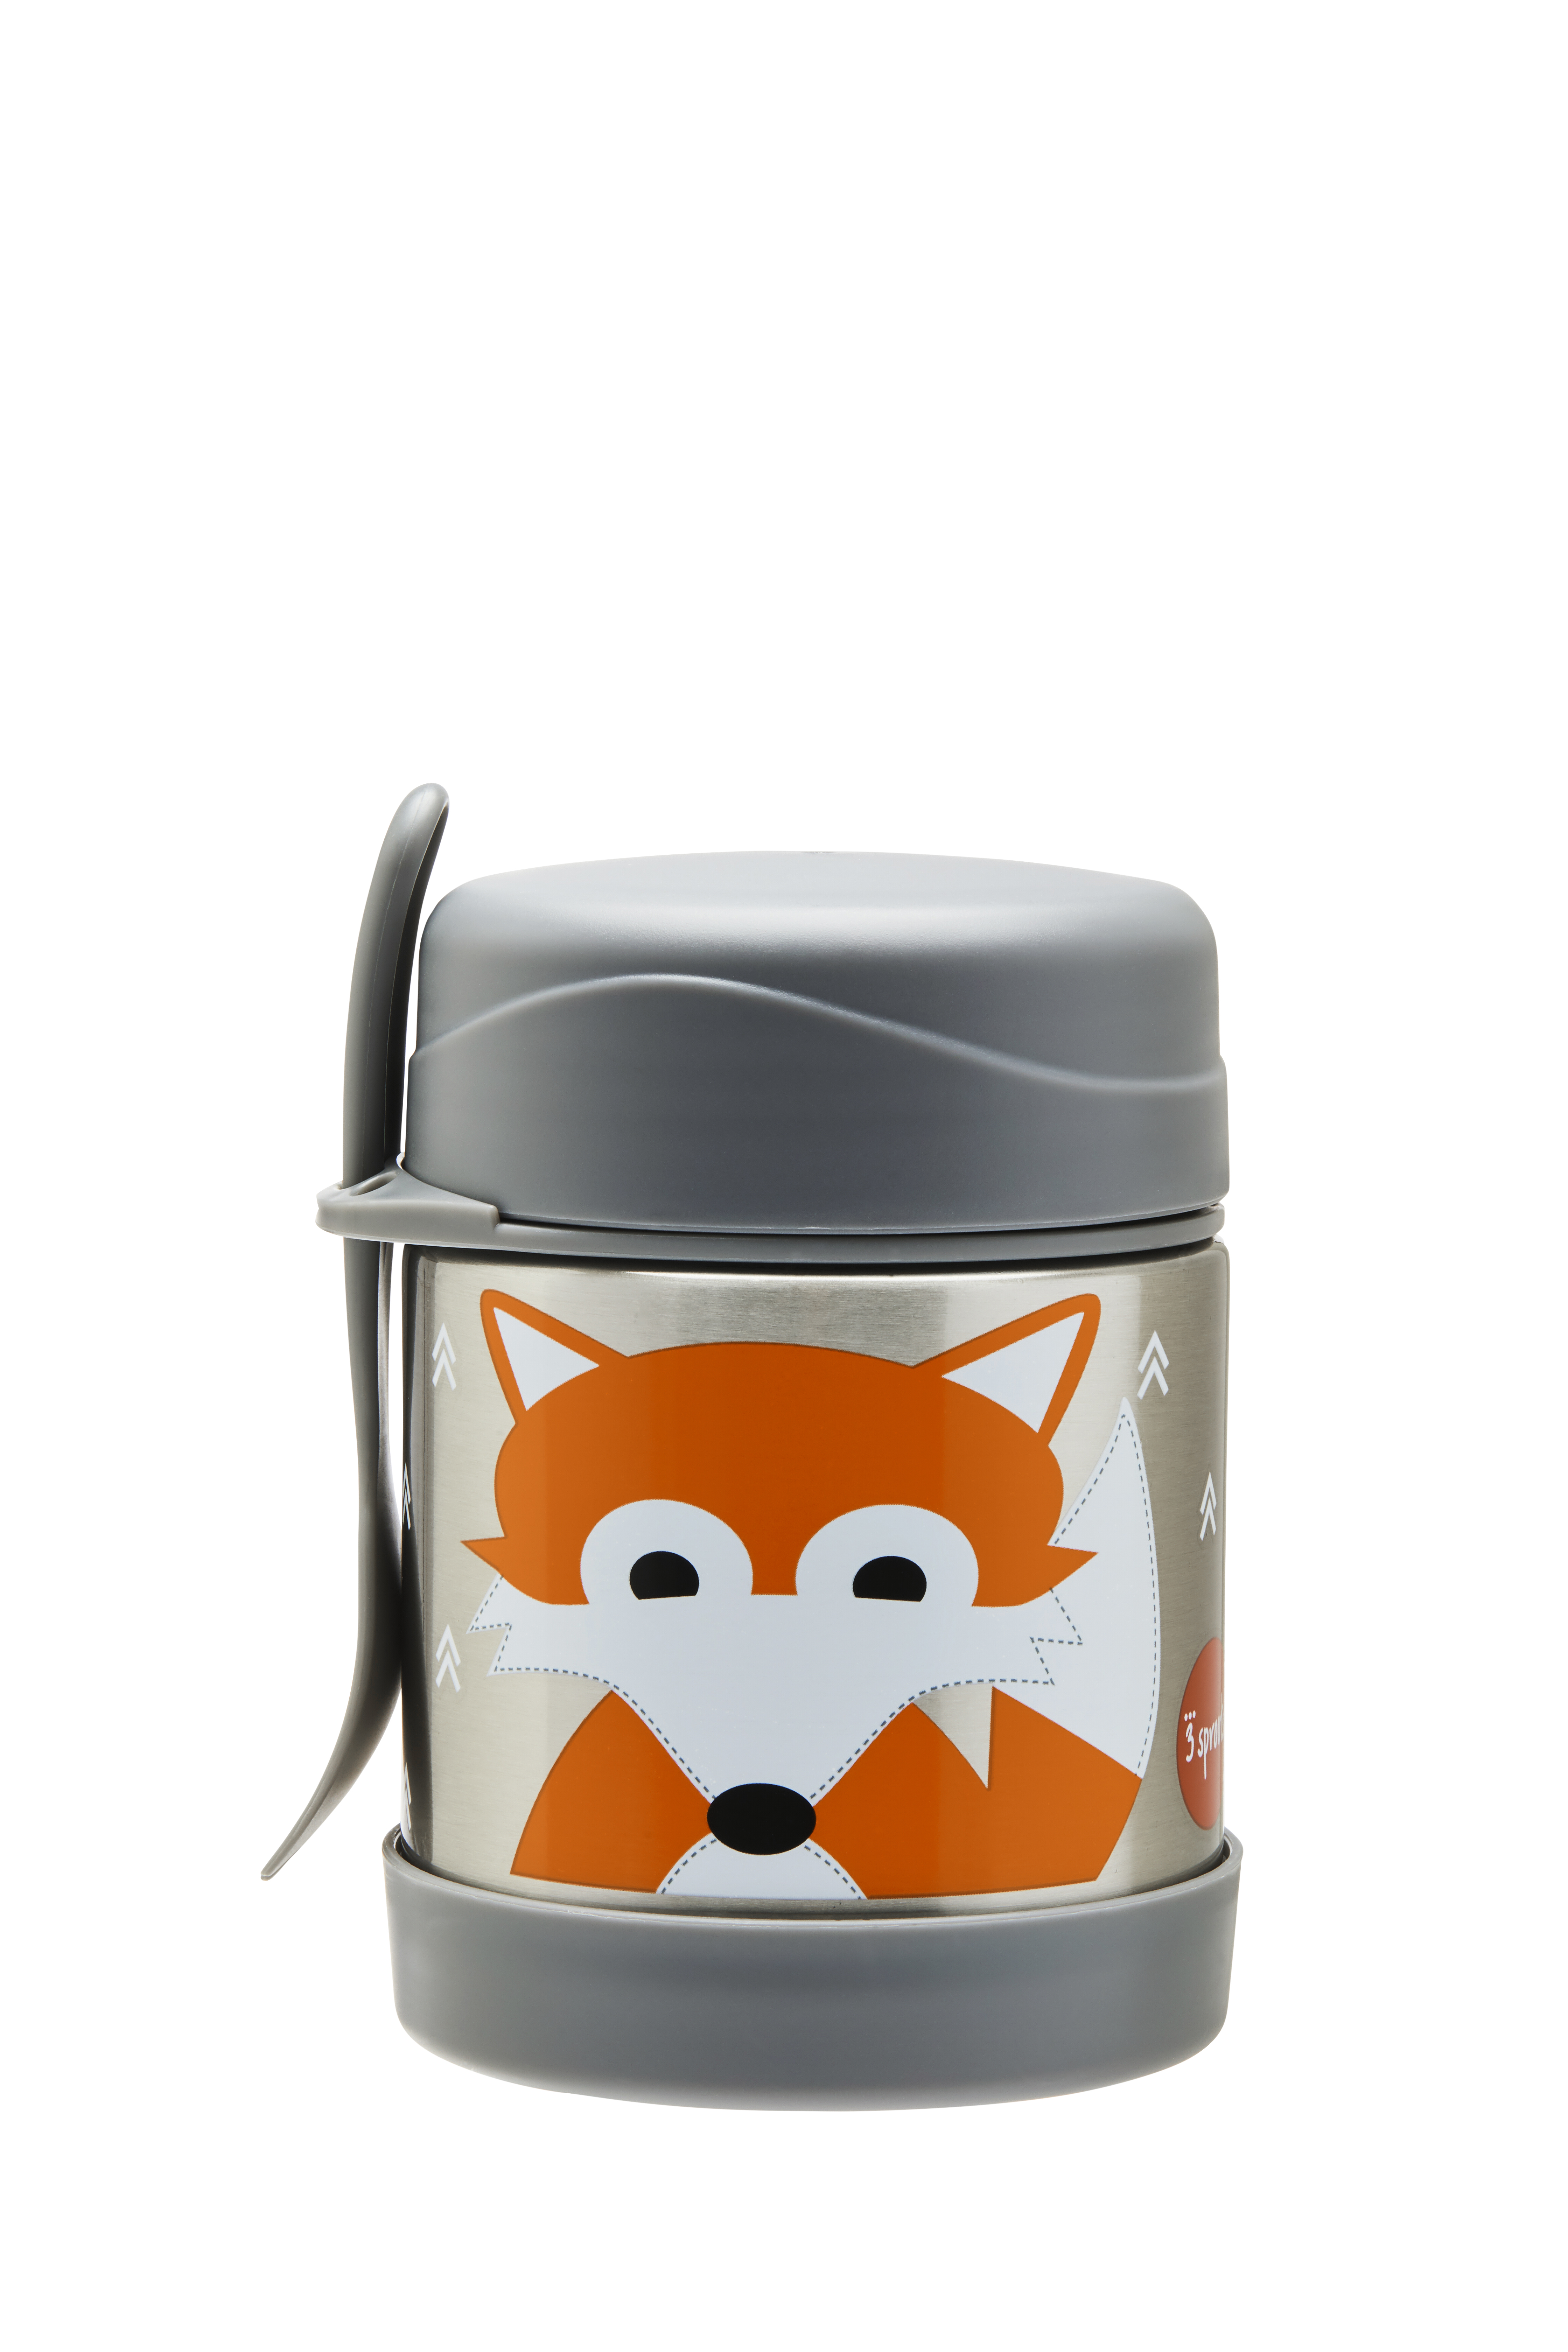 3 Sprouts - Stainless Steel Food Jar and Spork - Gray Fox - Baby og barn